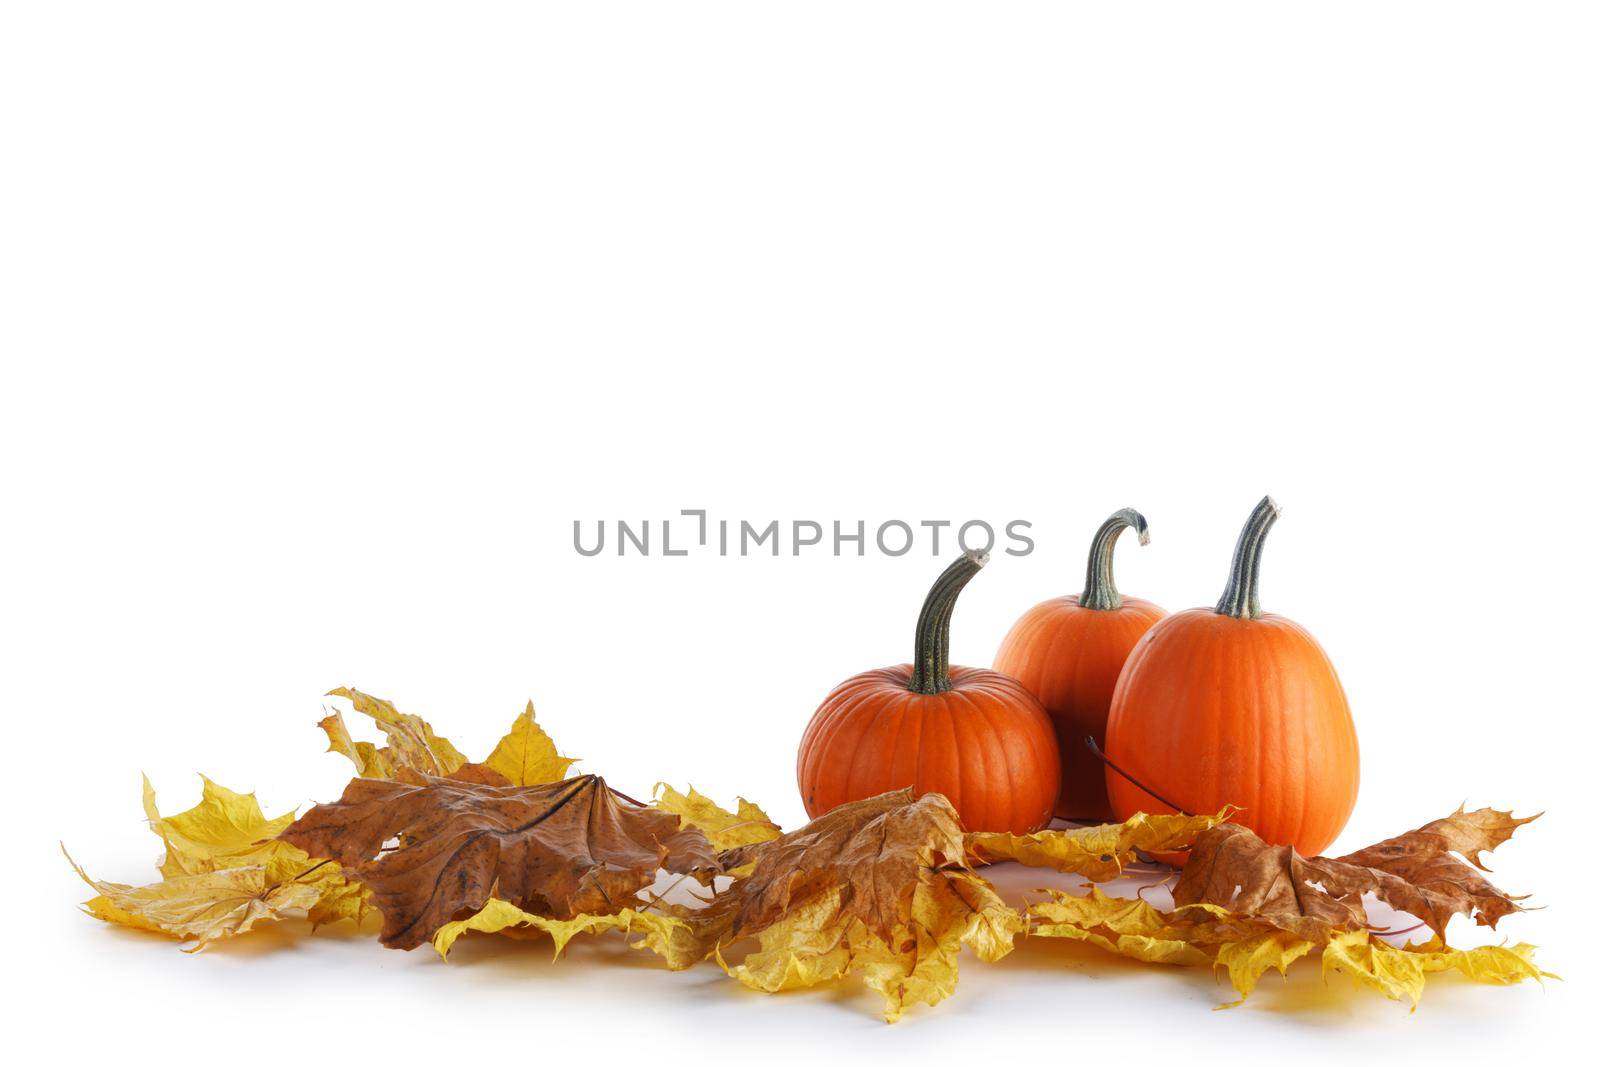 Three small pumpkins on fall maple leaves isolated on white background